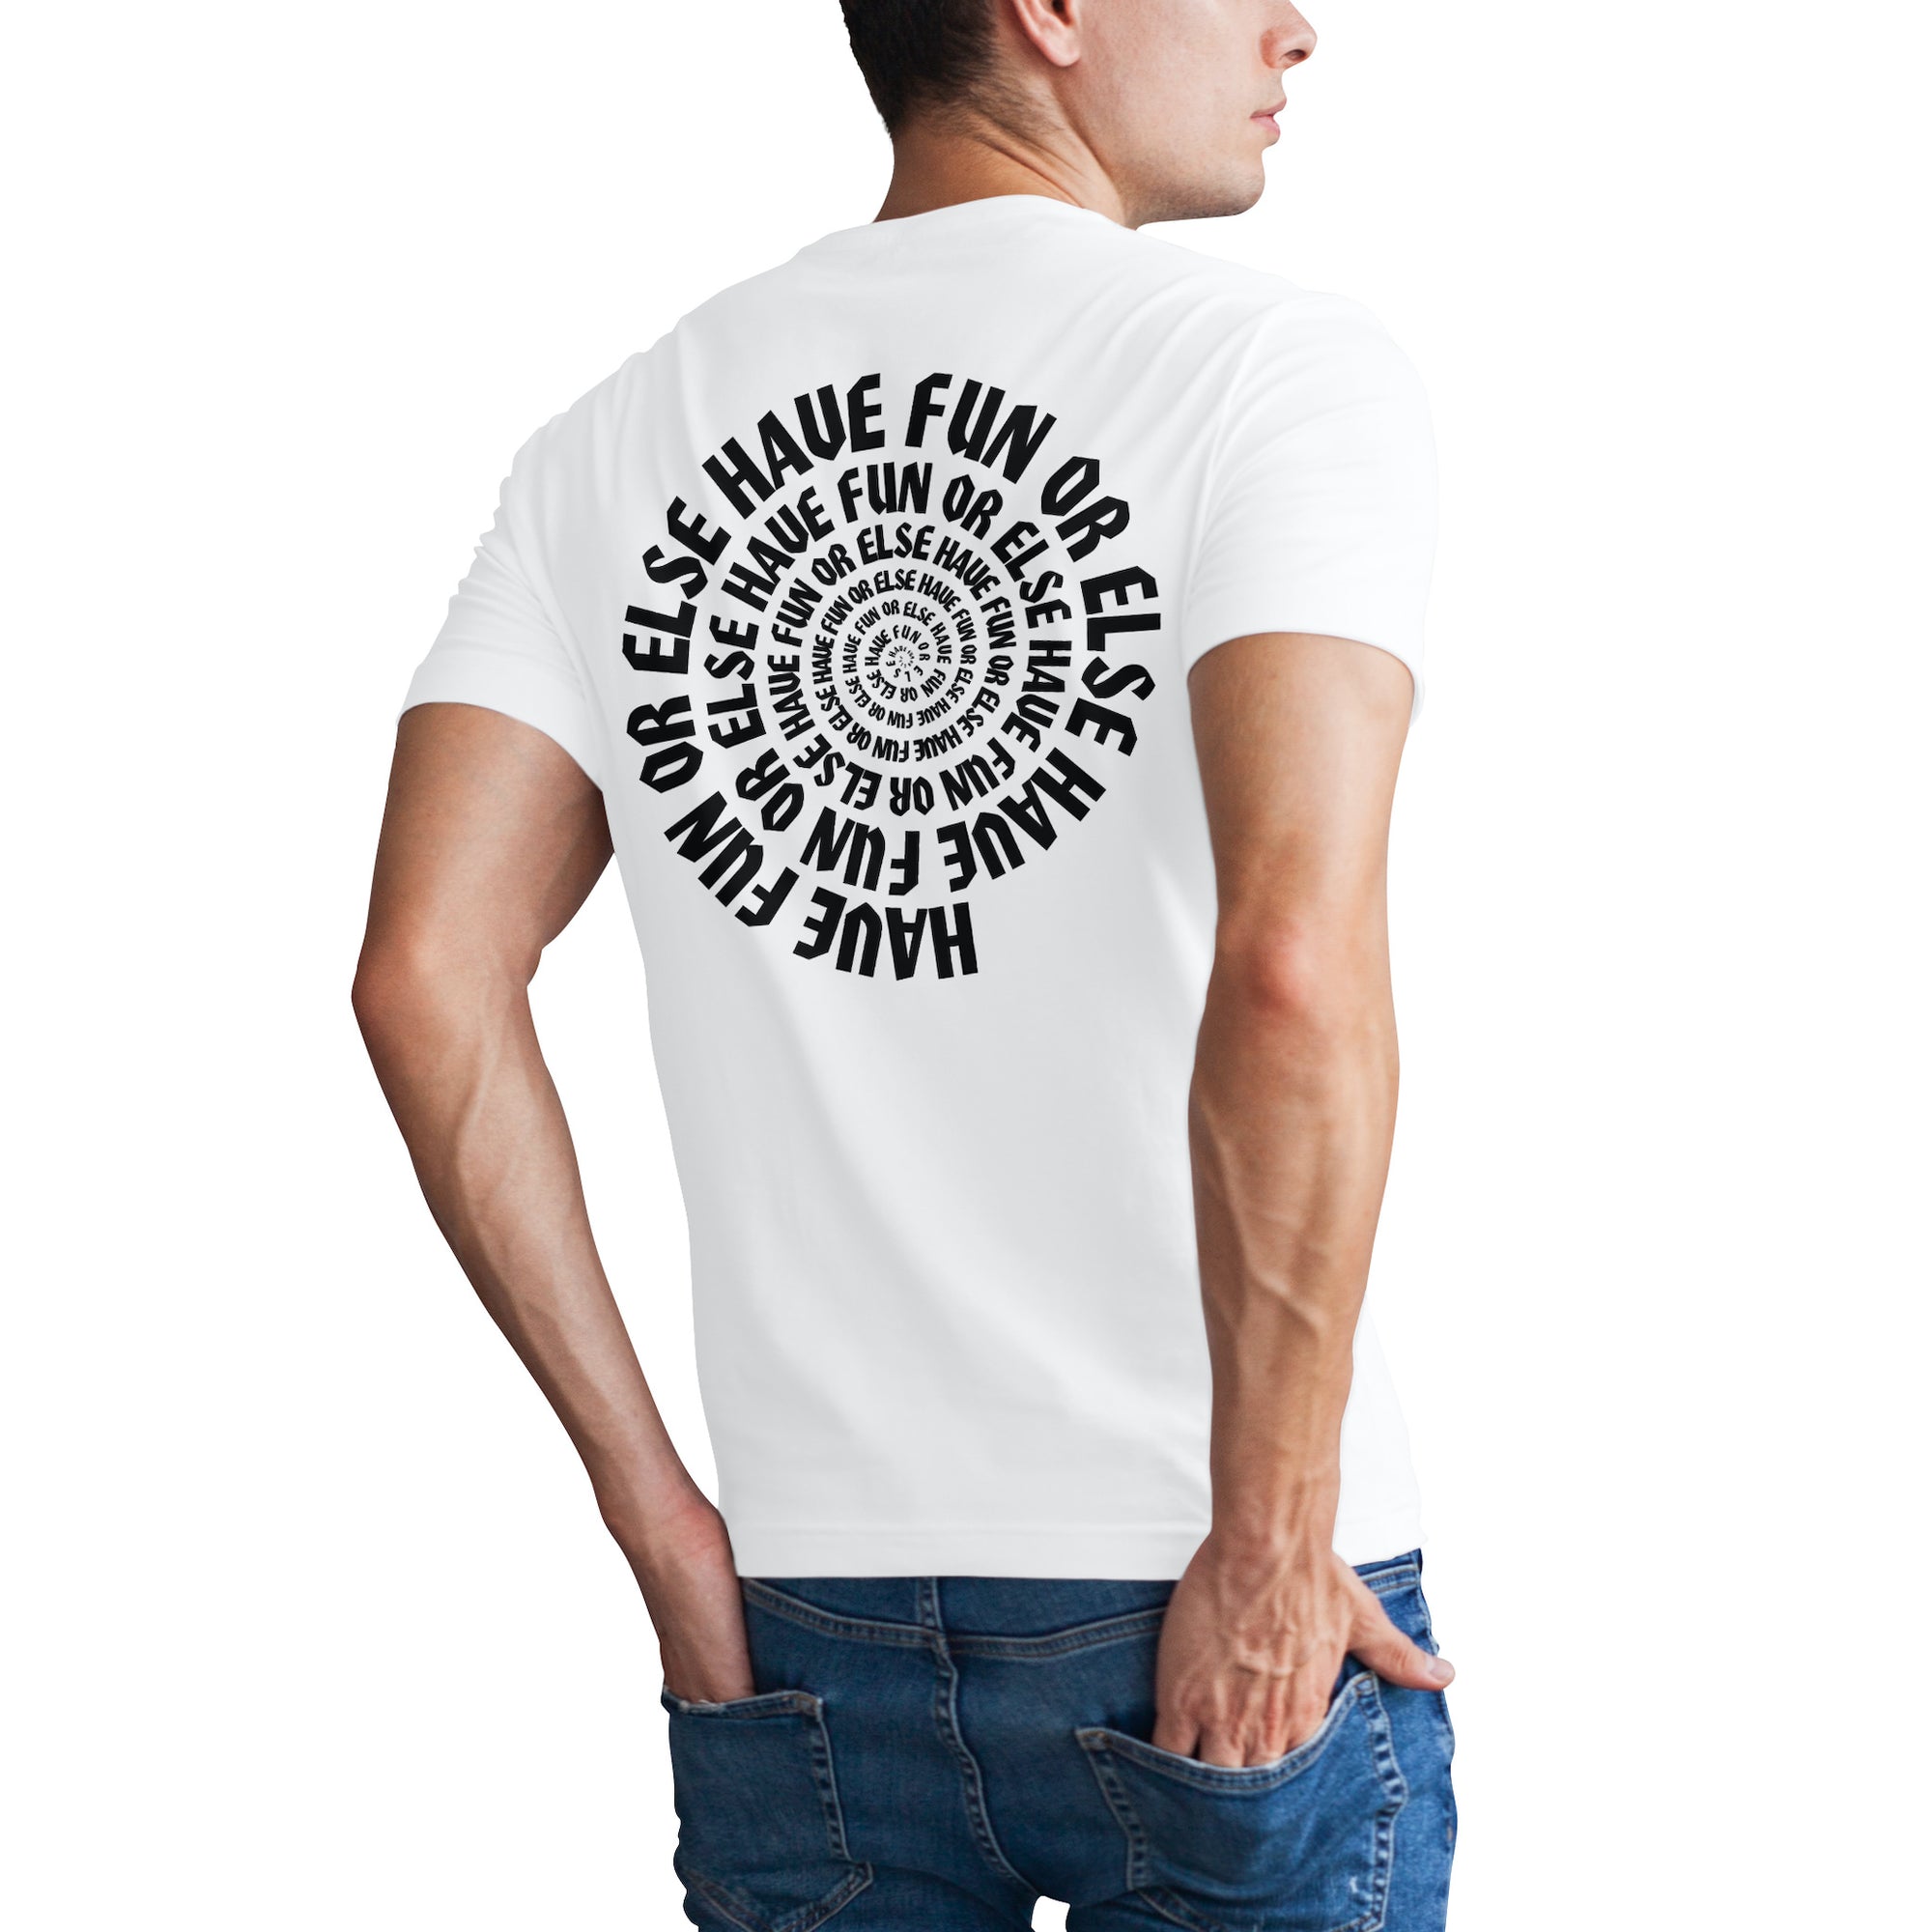 Man wearing Have Fun Or Else Easy Livin' white t-shirt, back